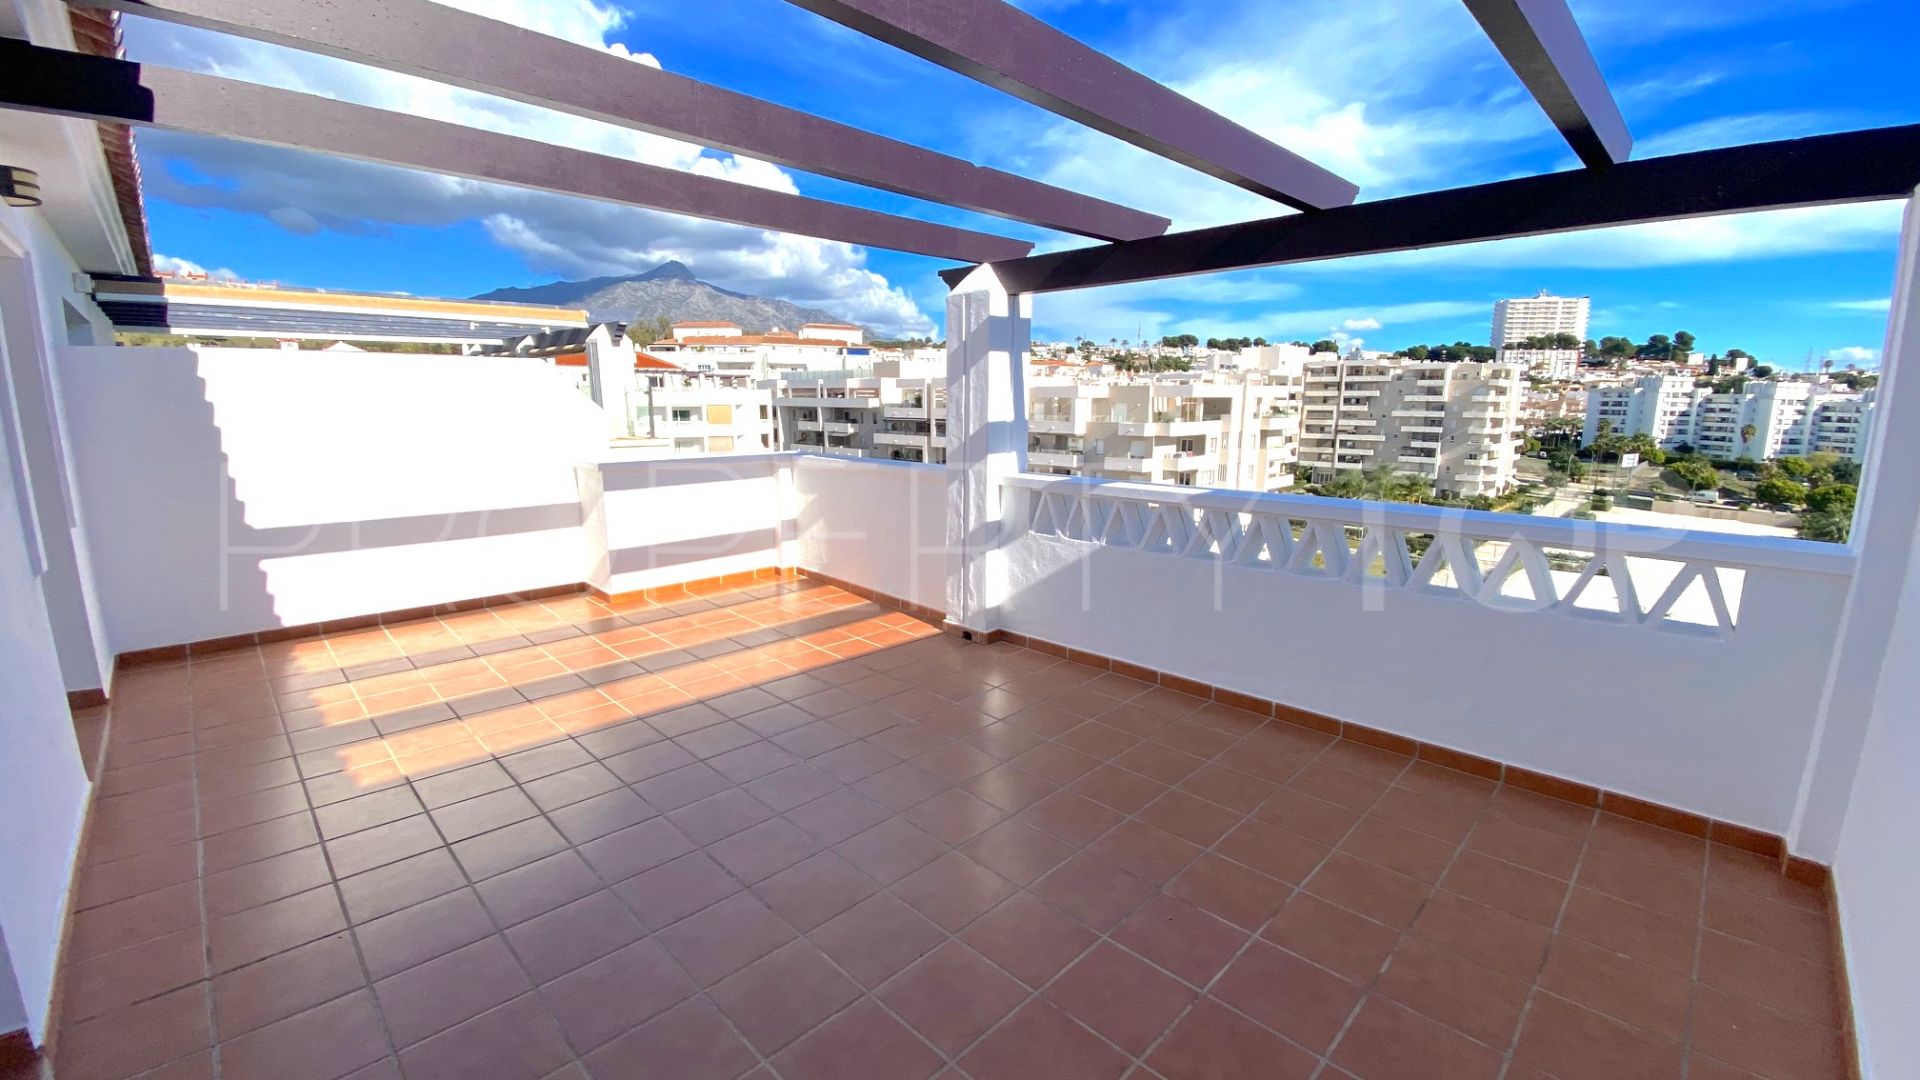 For sale penthouse in La Campana with 1 bedroom